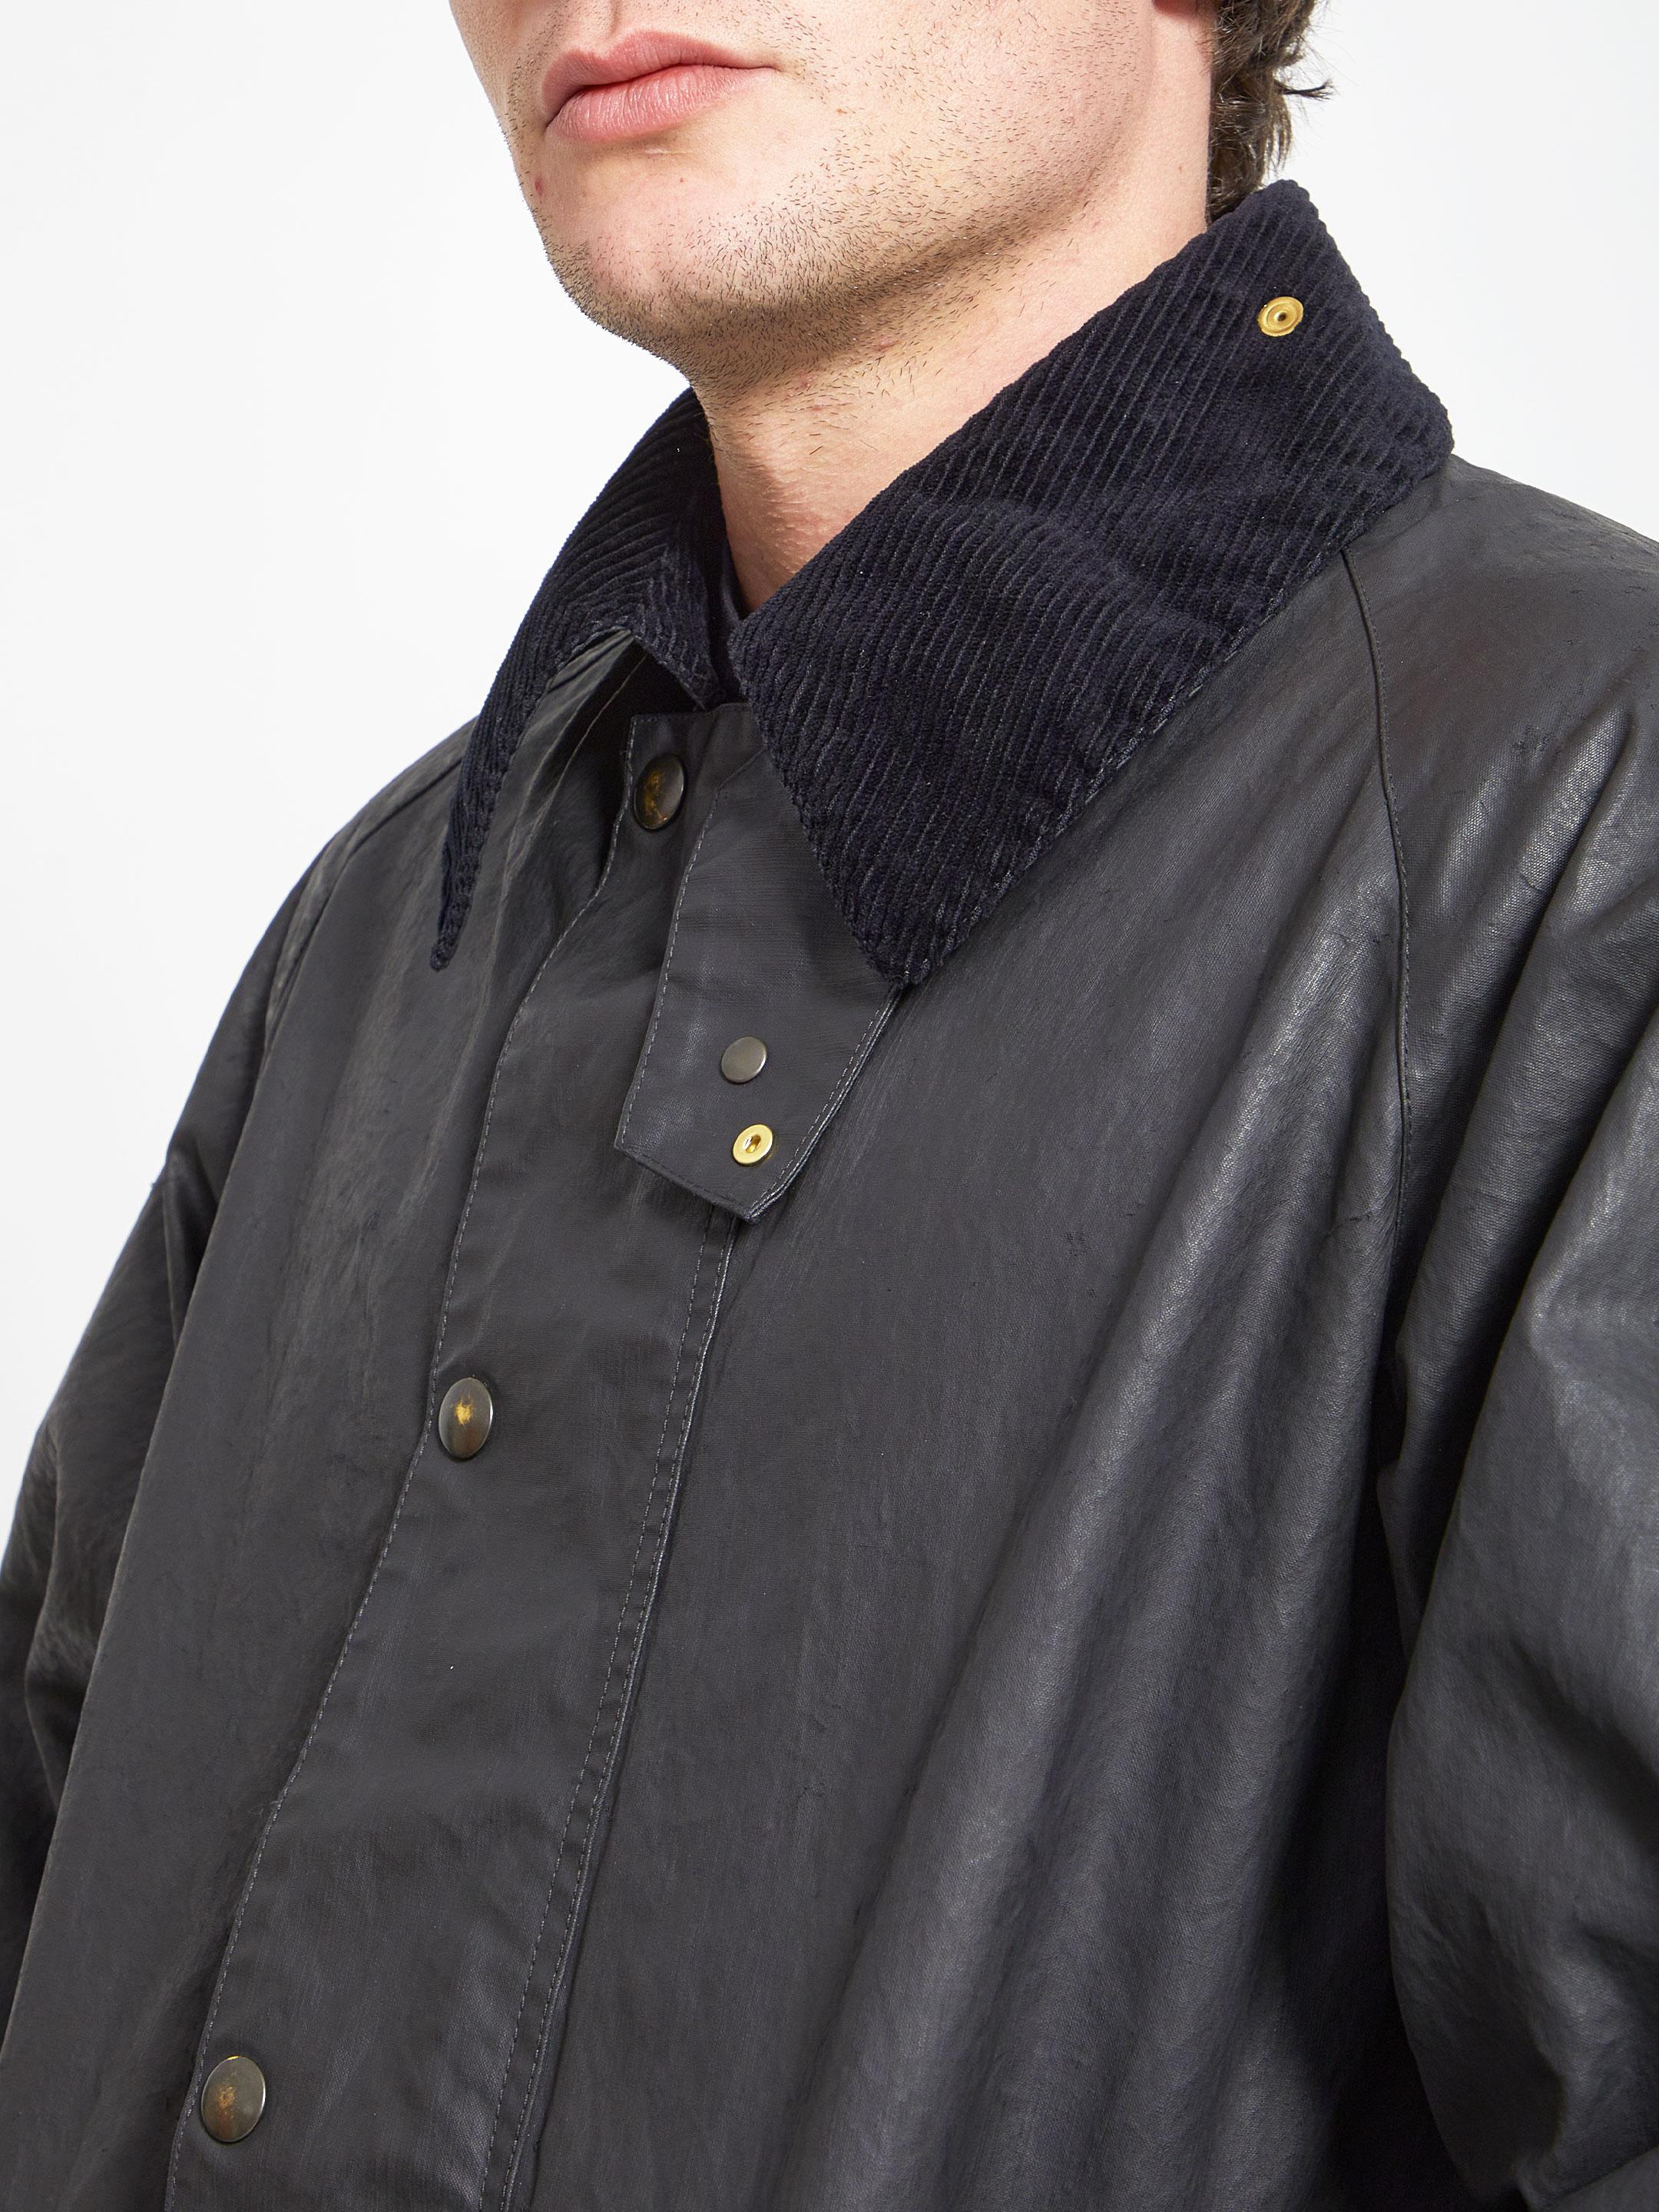 Maison Margiela Waxed Cotton Trench Coat in Black for Men | Lyst